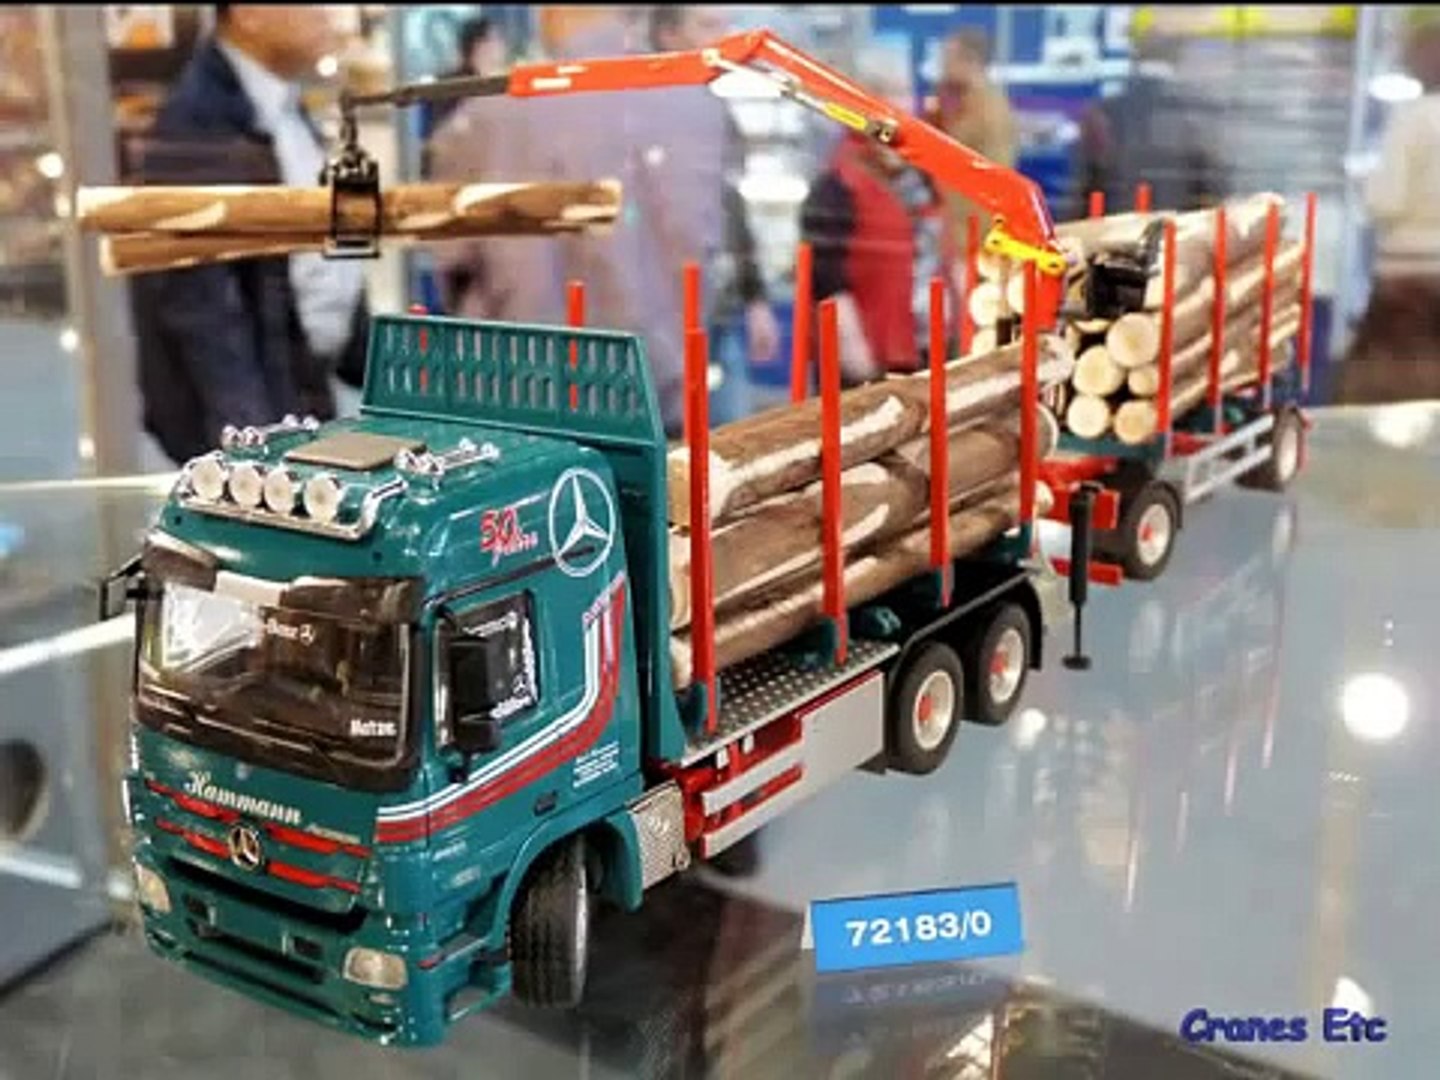 Nuremberg Toy Fair 11 Show Report By Cranes Etc Tv Video Dailymotion